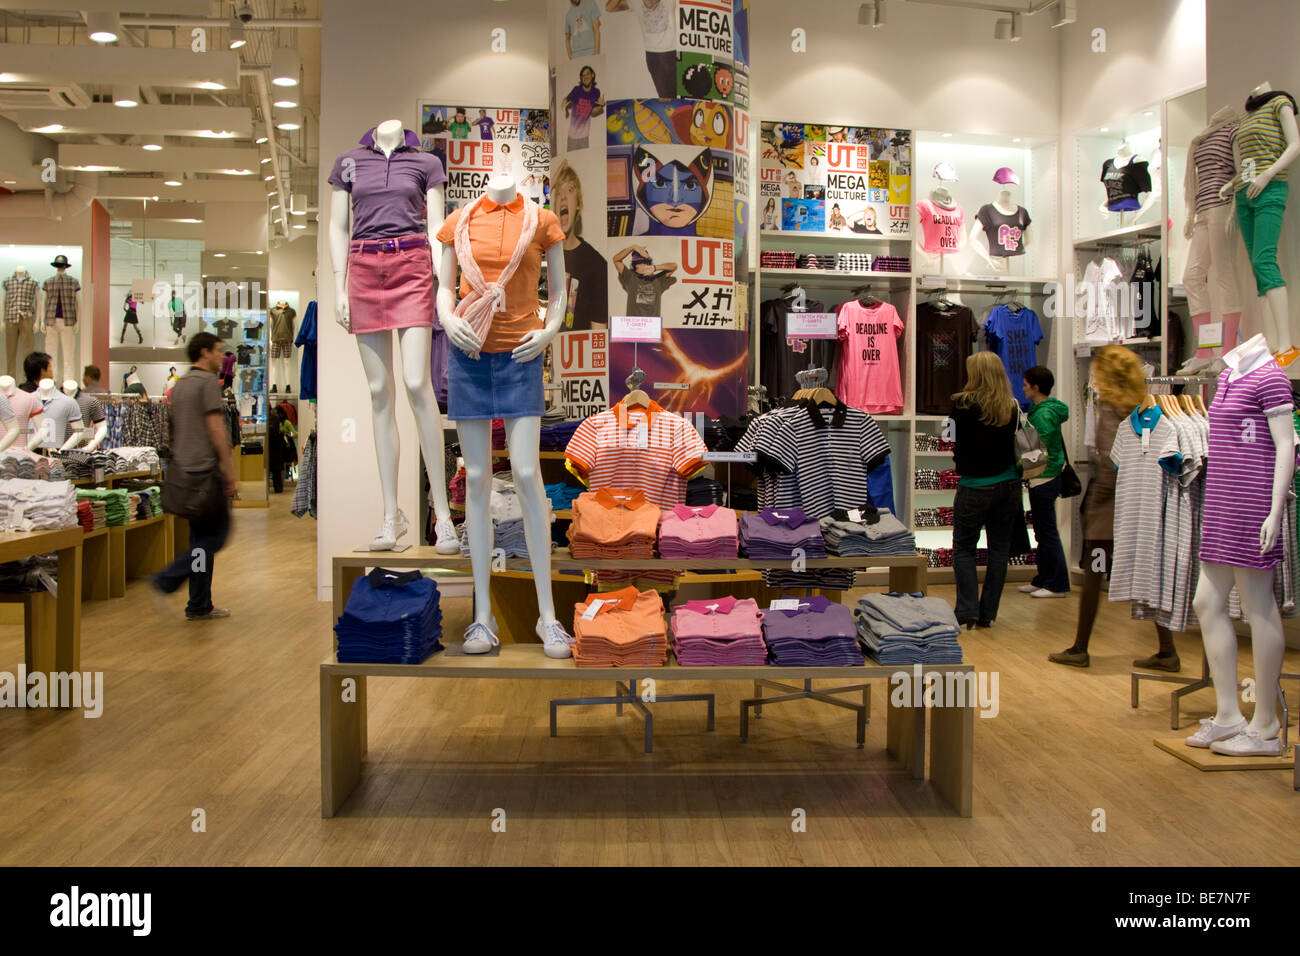 Oxford Street Uniqlo Uk High Resolution Stock Photography and Images - Alamy